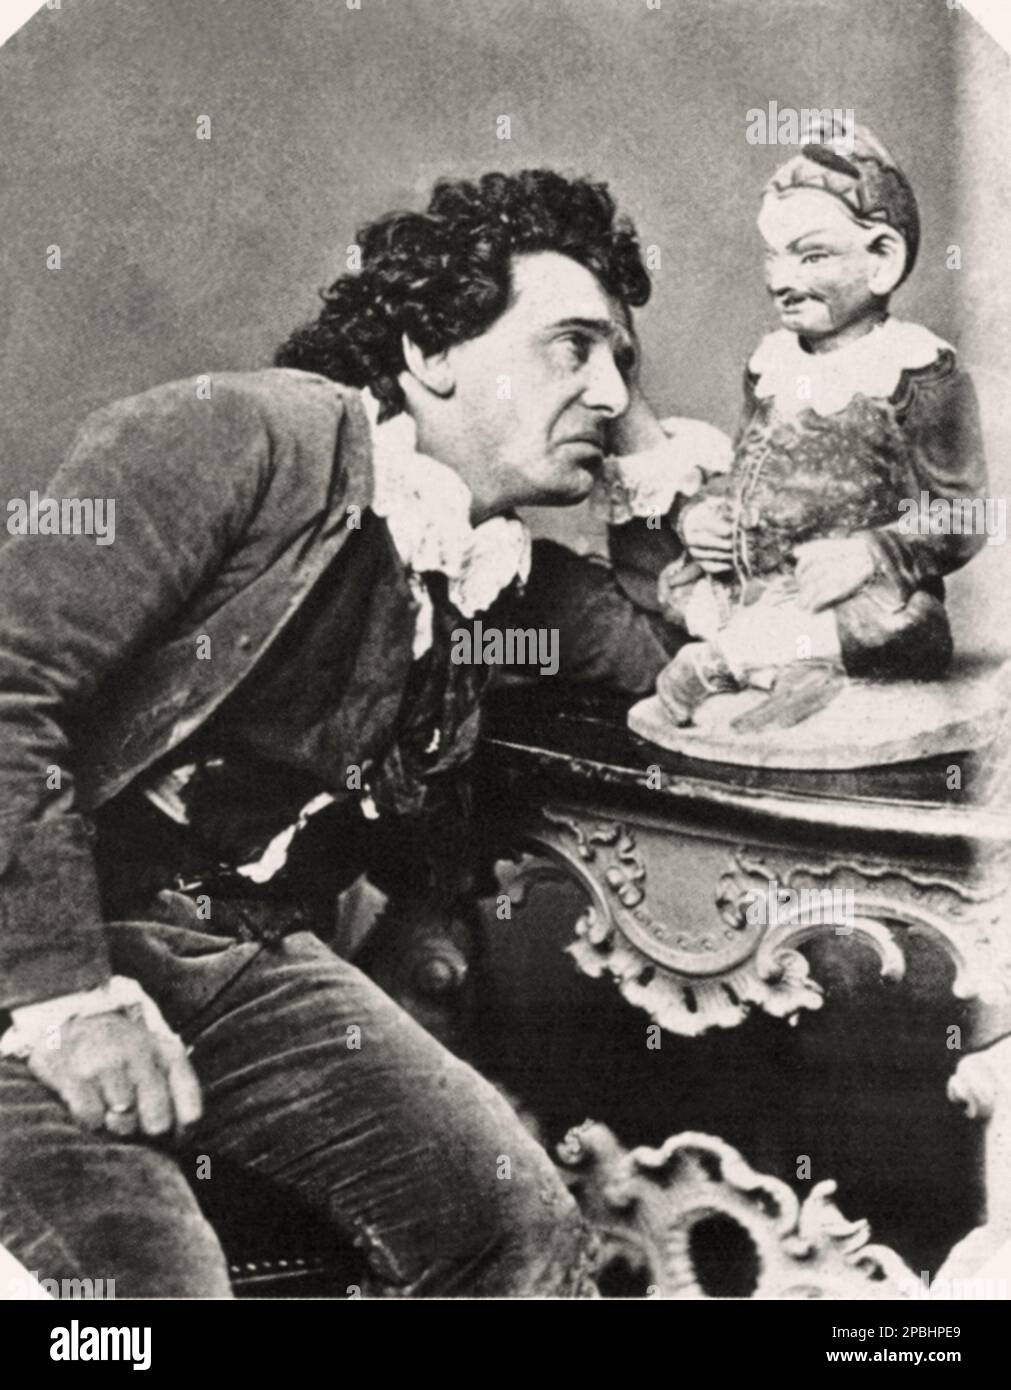 1865 ca : The german theatre actor  and director ERNST Von POSSART ( 1841 - 1921 ). Connected with the Munich Court Theatre after 1864, he became the oberregisseur in 1875 . In 1877 he was made director of the Bavarian royal theatres; from 1887 to 1892 toured the United States, Germany, Russia, and The Netherlands; in 1895 to 1905 was general director of the Bayerische Hoftheater; and in 1901 opened the Prinzregententheater ( Prince Regent's Theatre ). In the private royal theatre ( the Residenz ) he produced several of Mozart 's operas. Among his own roles were Nathan, Gessler, Mephisto, Iago Stock Photo